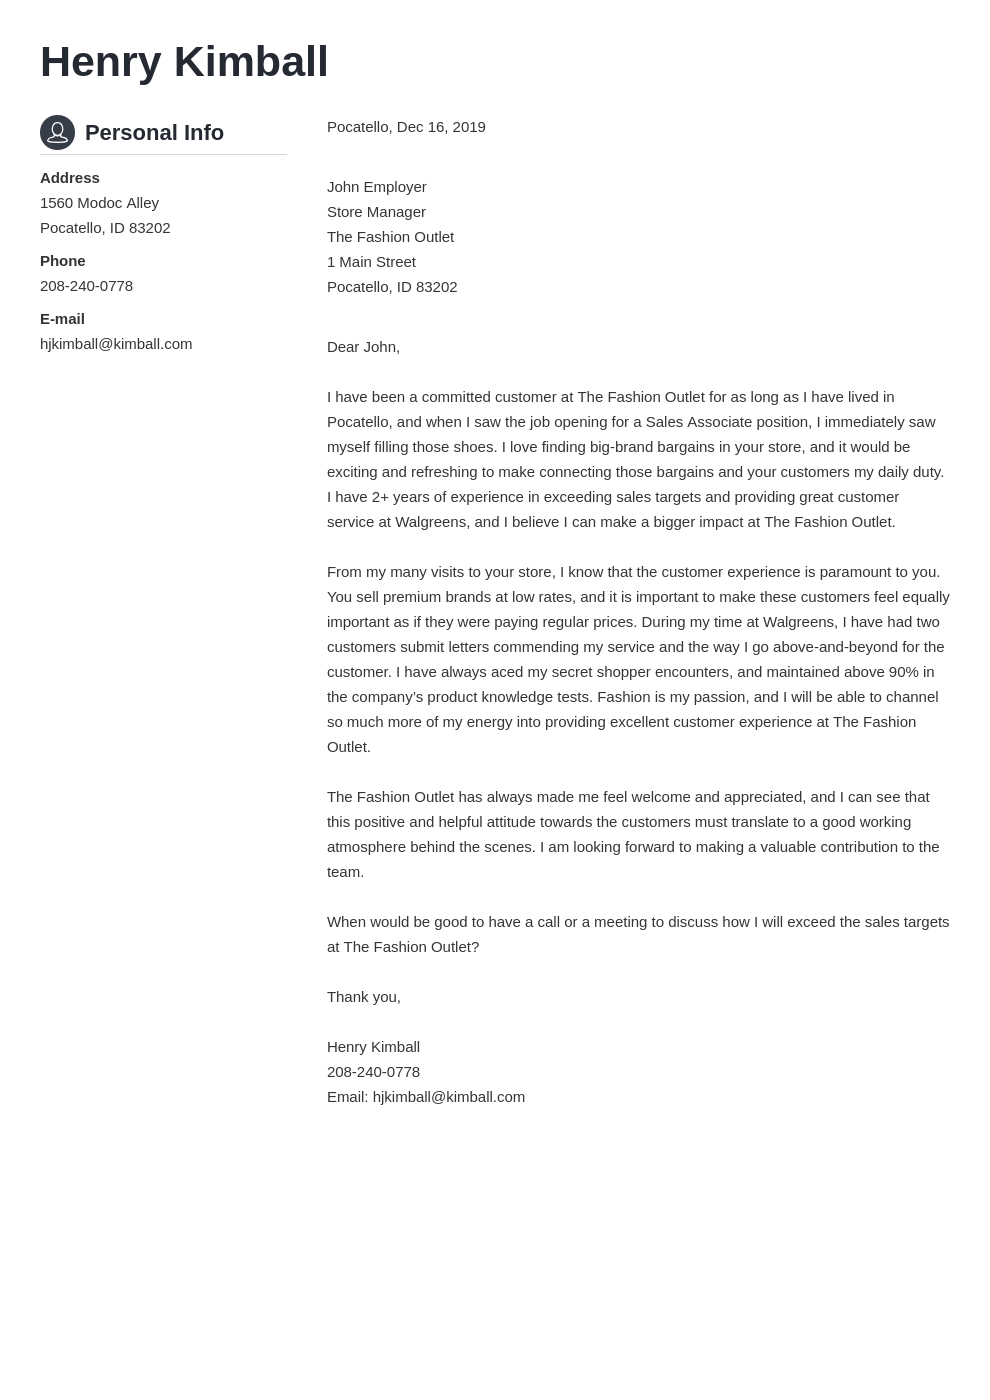 Sales Associate Cover Letter: Examples & Templates to Fill